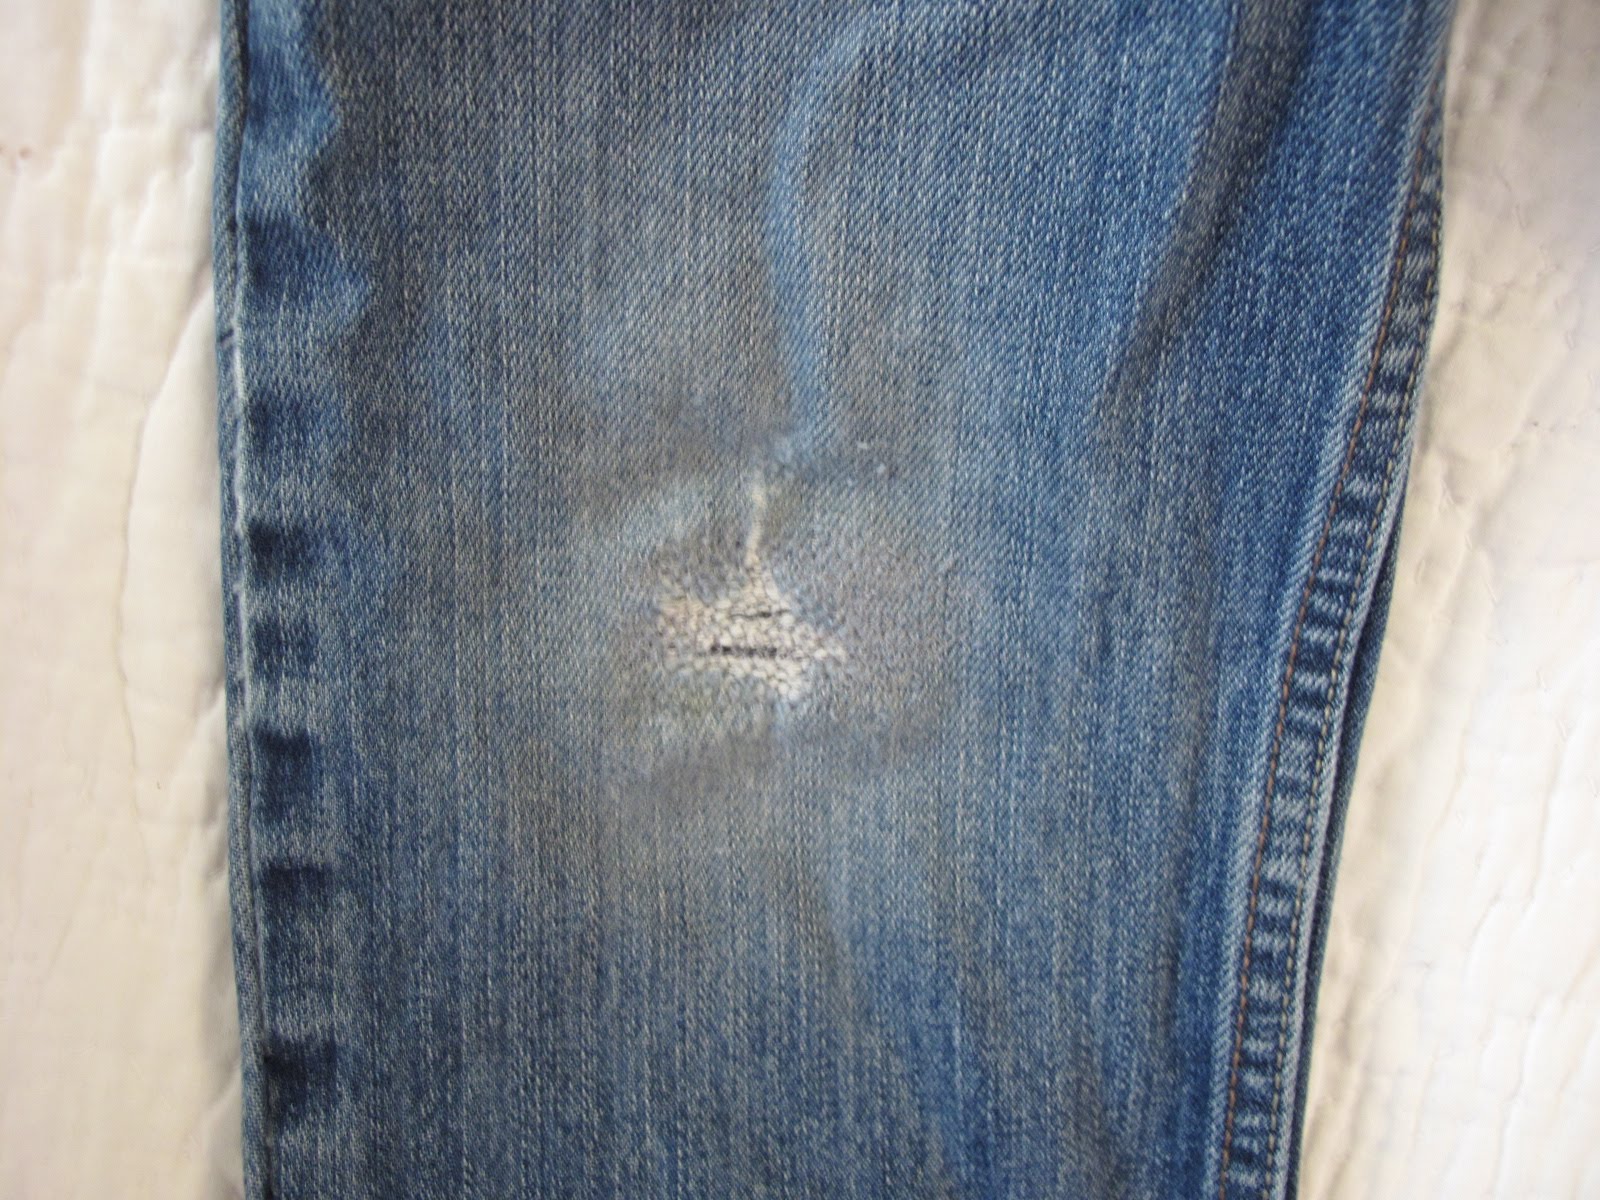 Resweater: Tutorial Tuesday - patching ripped jeans